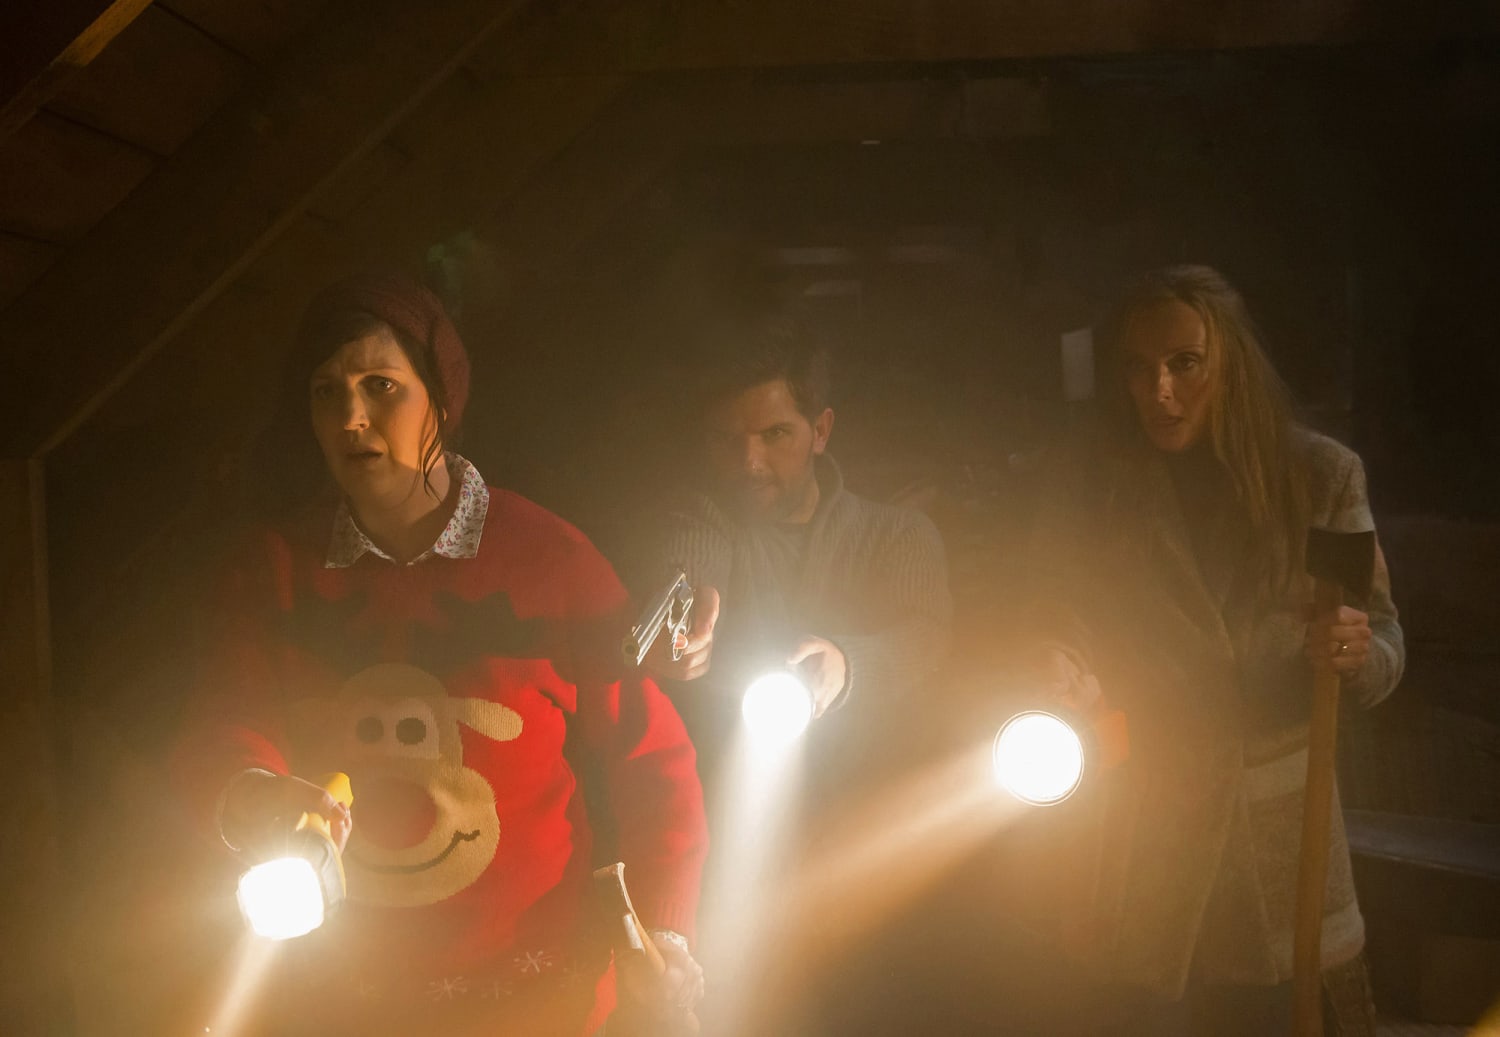 Are you tired of the endless demands to be merry? Watch a Christmas horror movie.